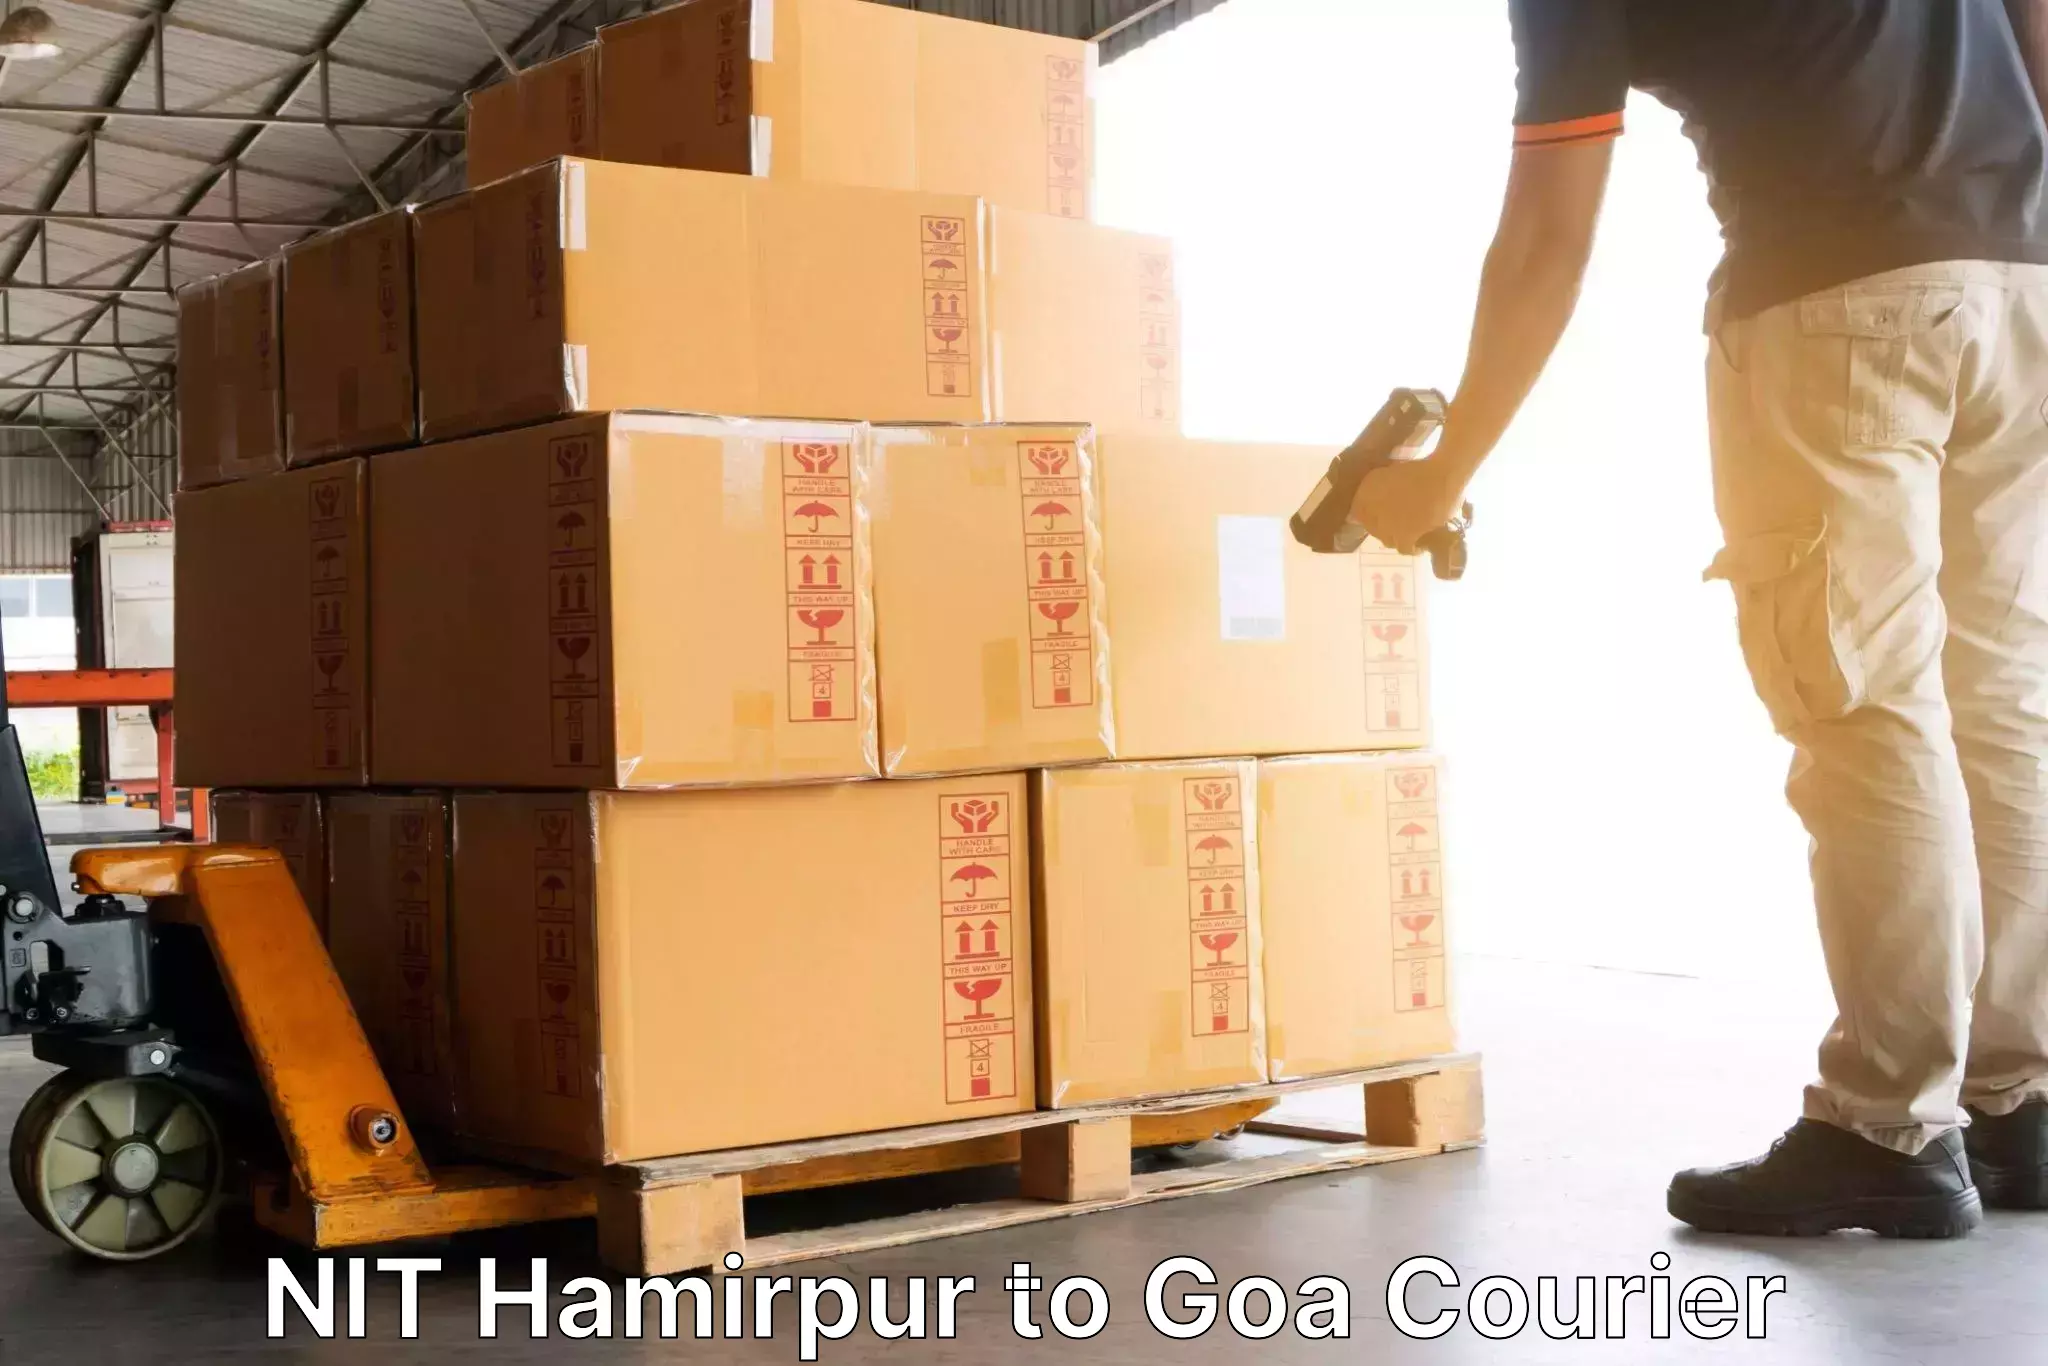 Professional delivery solutions NIT Hamirpur to Panaji